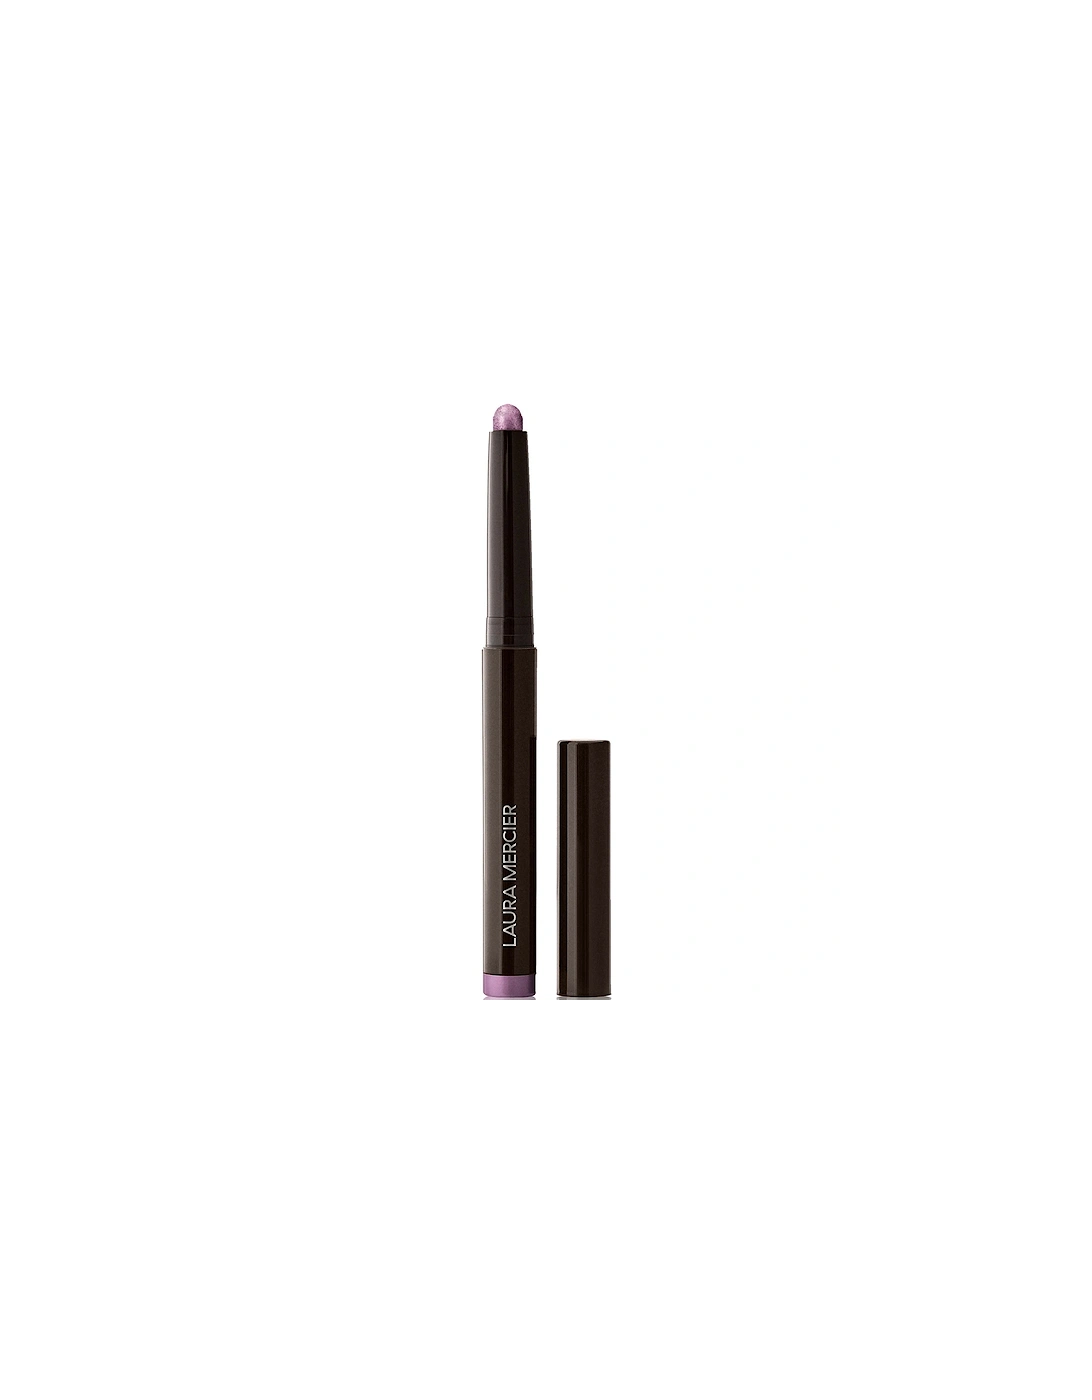 Caviar Stick Eye Colour - Orchid 1.64g, 2 of 1